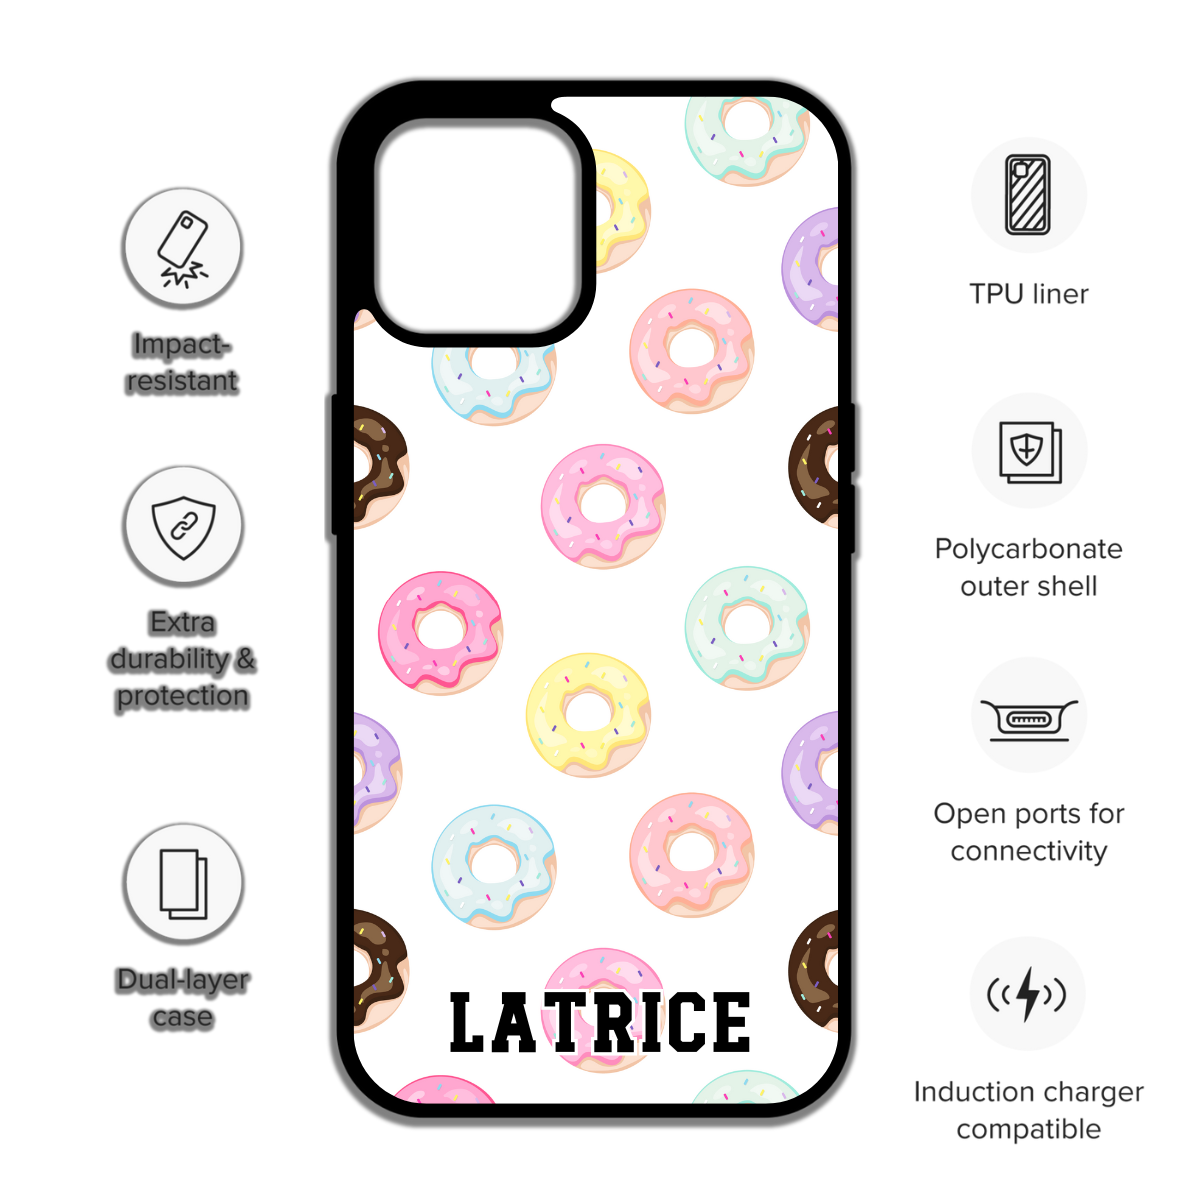 Donut Phone Case perfect gift for her - cute phone case - best birthday gift - iphone case - sweets phone case - candy phone case -